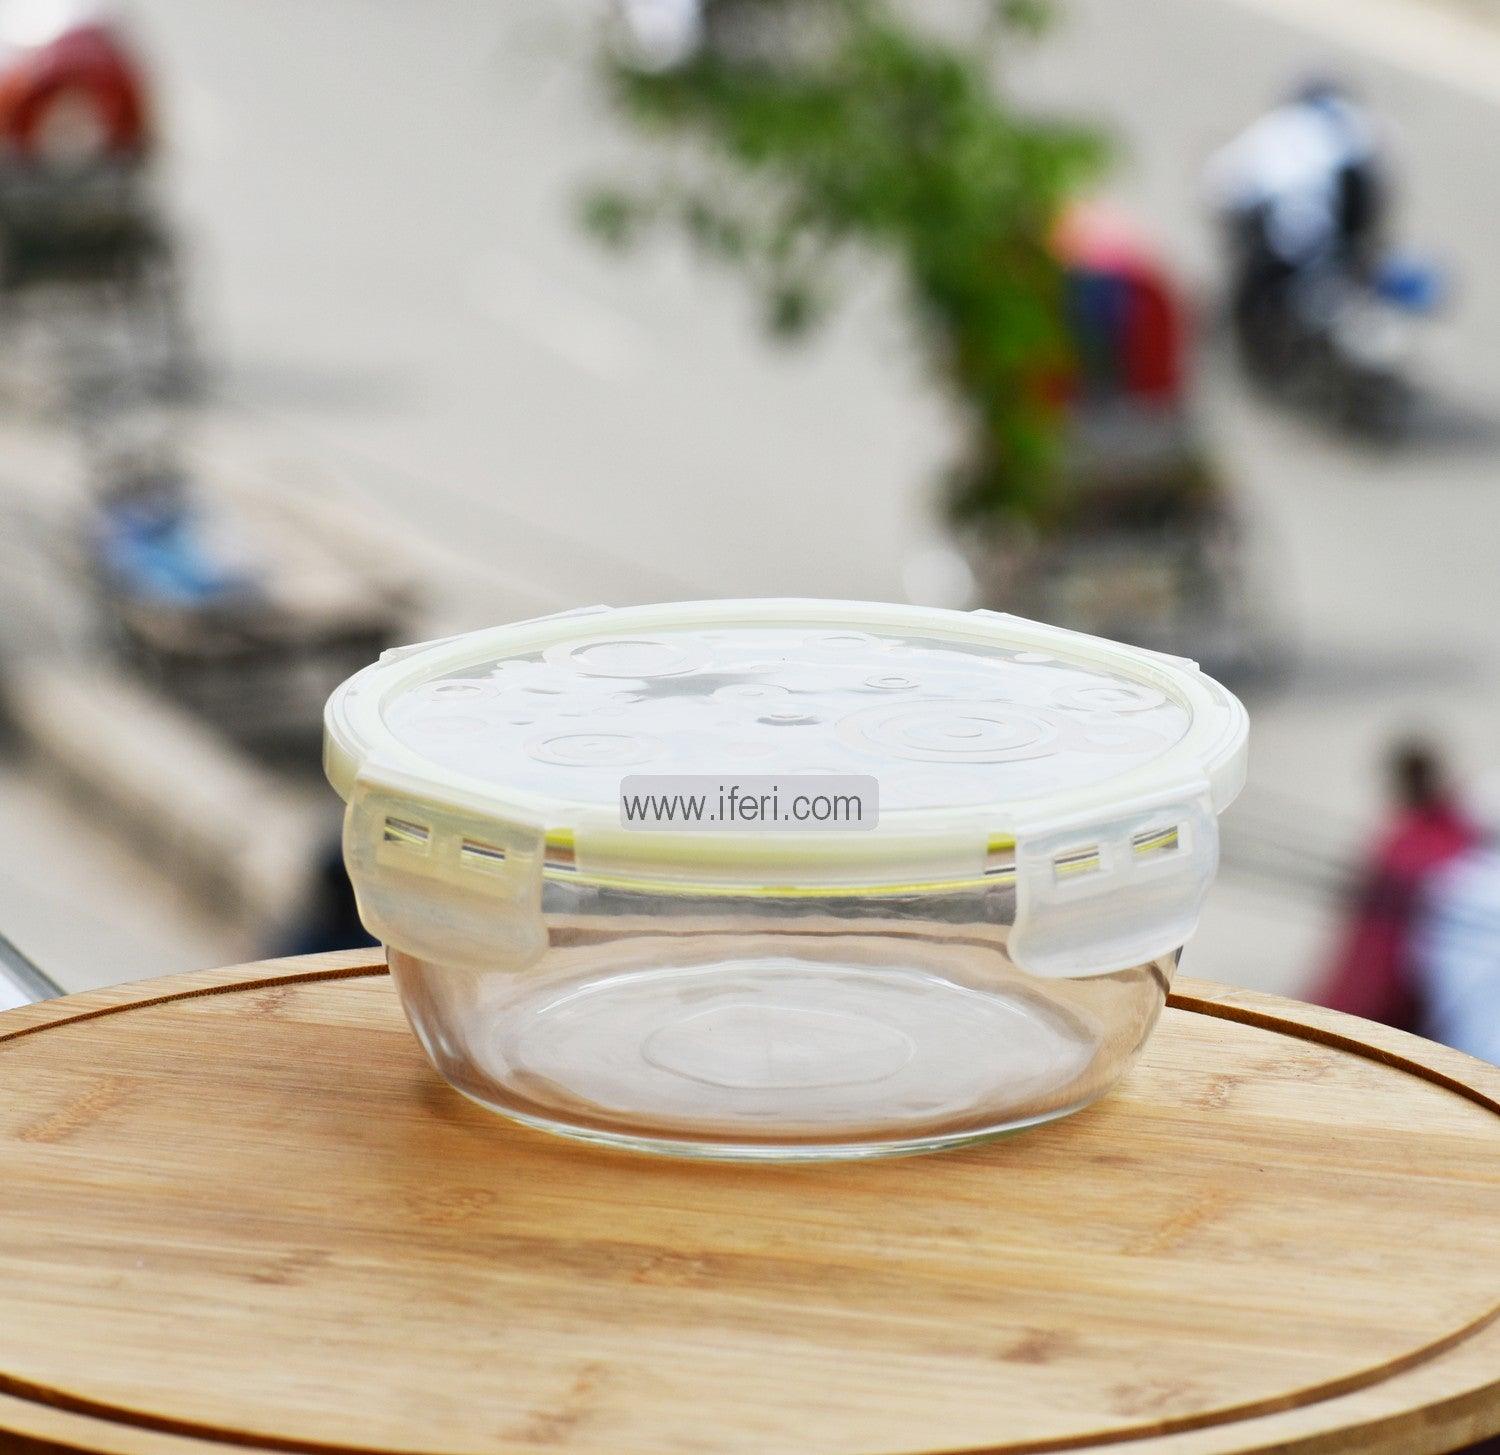 6.5 inch Oven Proof Glass Food Container RY0123 Price in Bangladesh - iferi.com